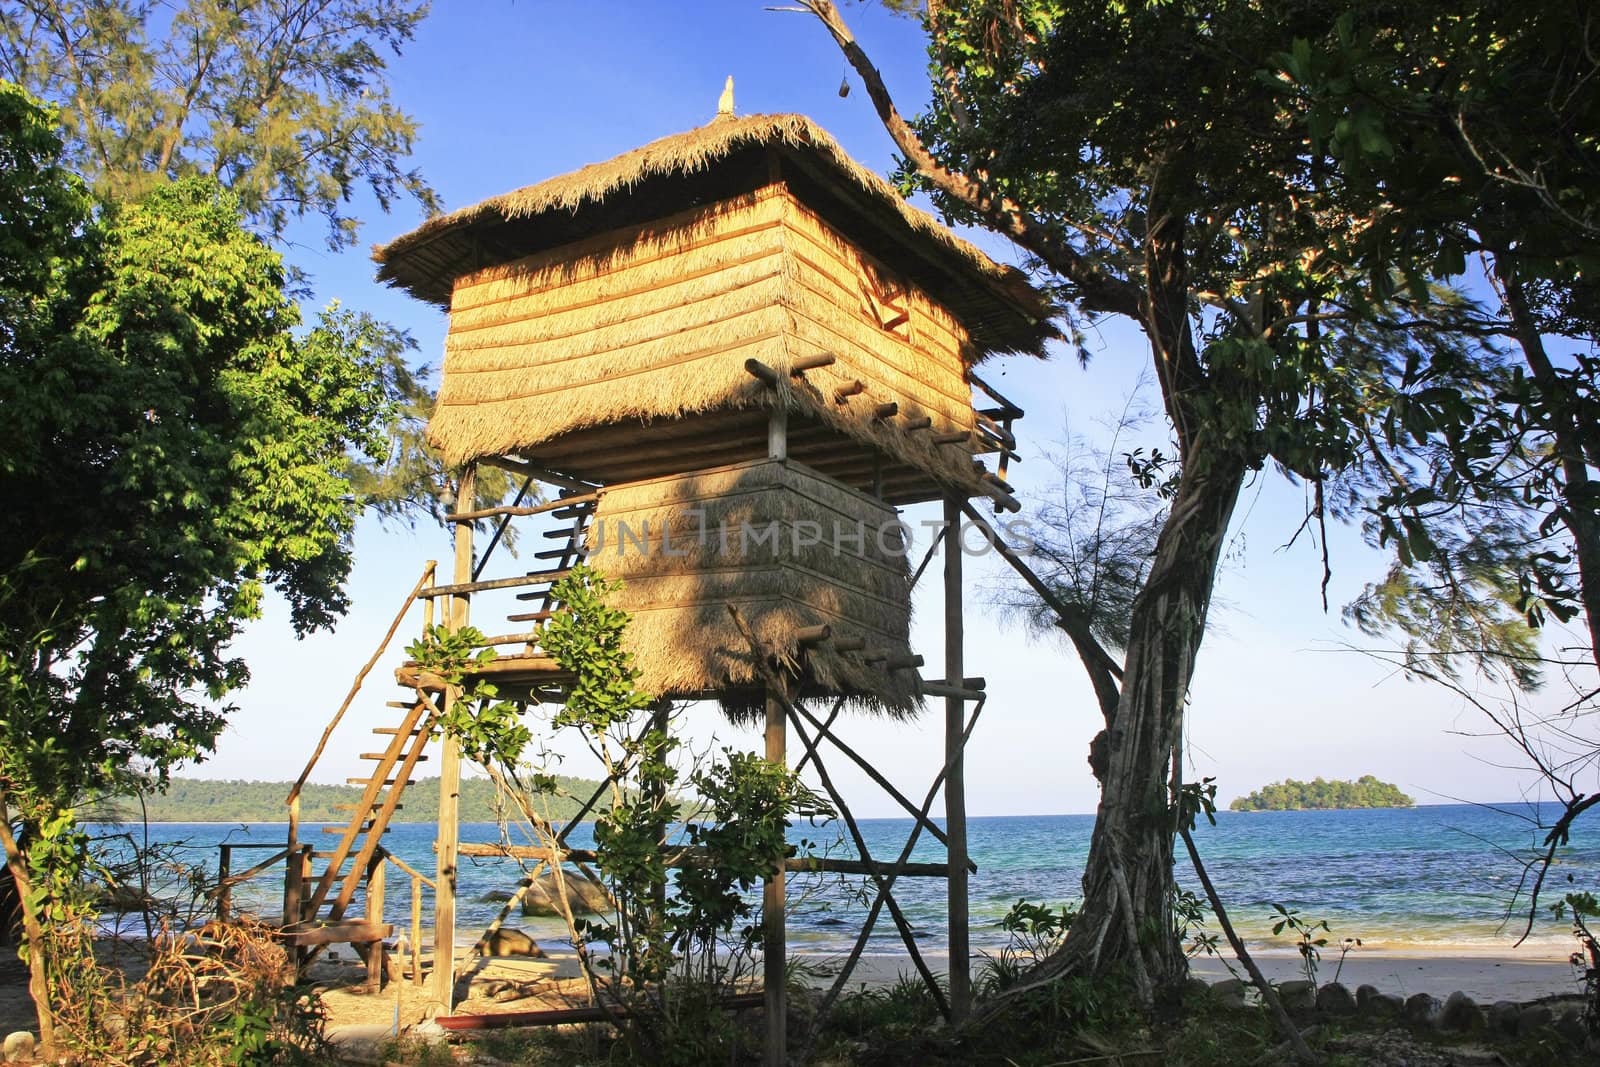 Tree house bungalow, Koh Rong island, Cambodia, Southeast Asia